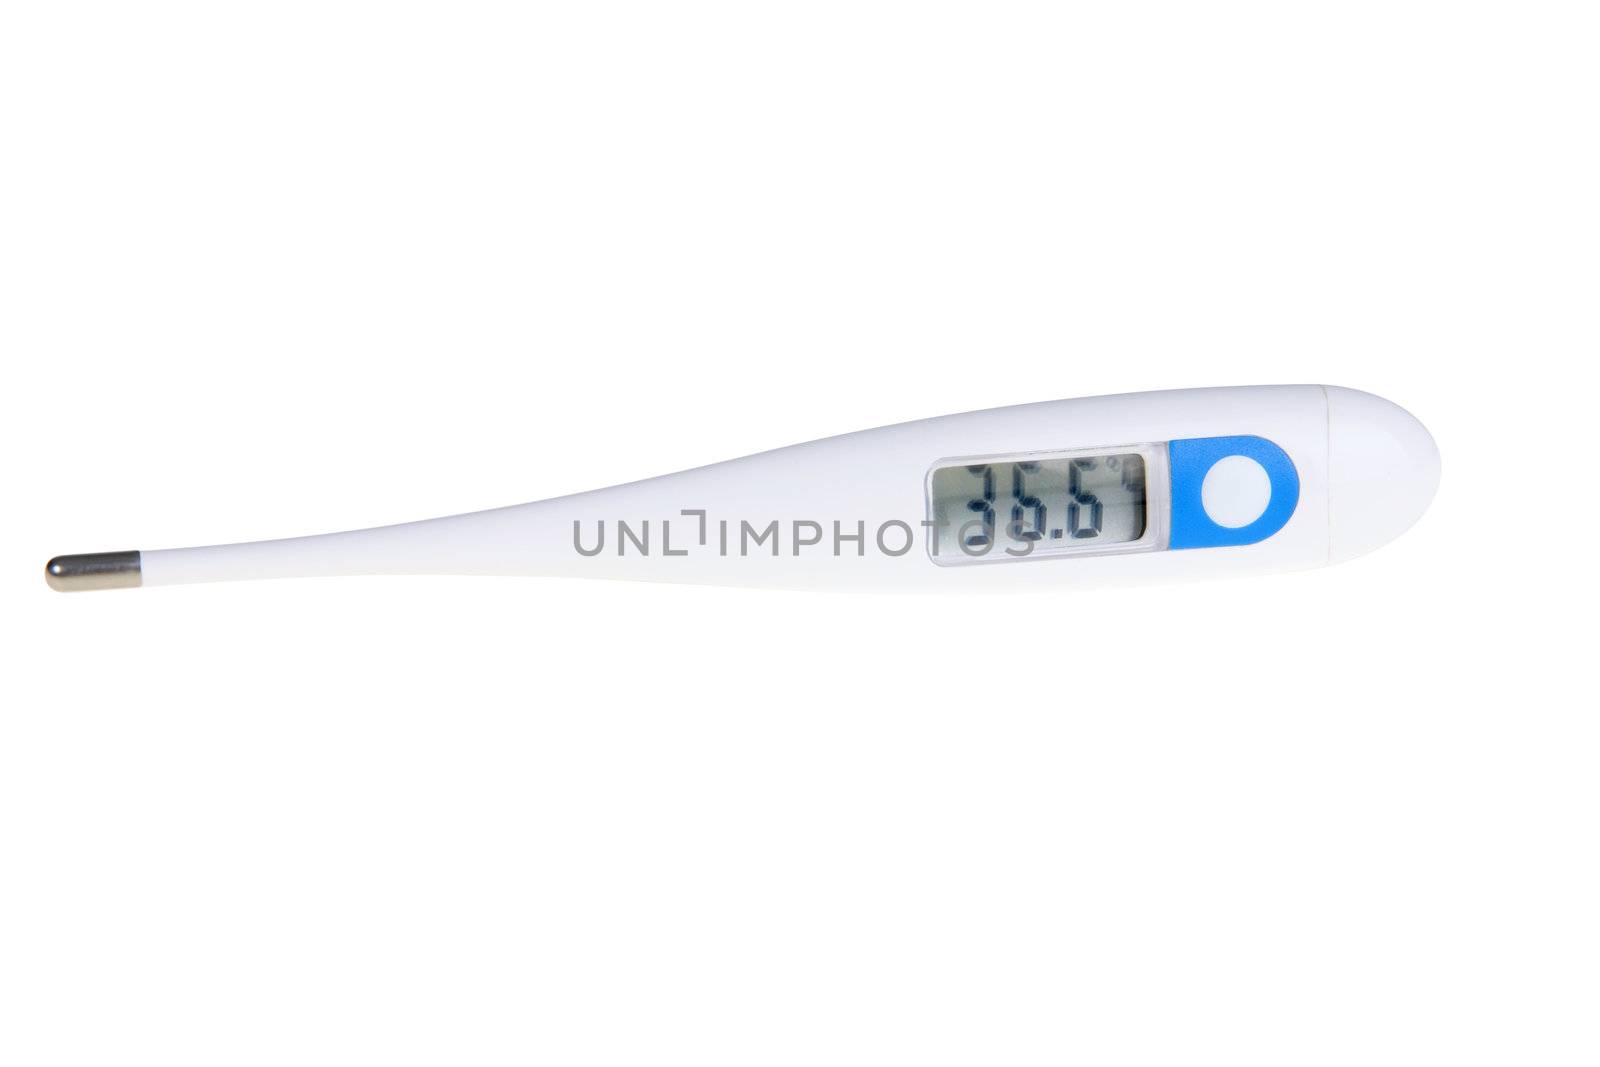 Digital thermometer isolated on white background (with clipping path)